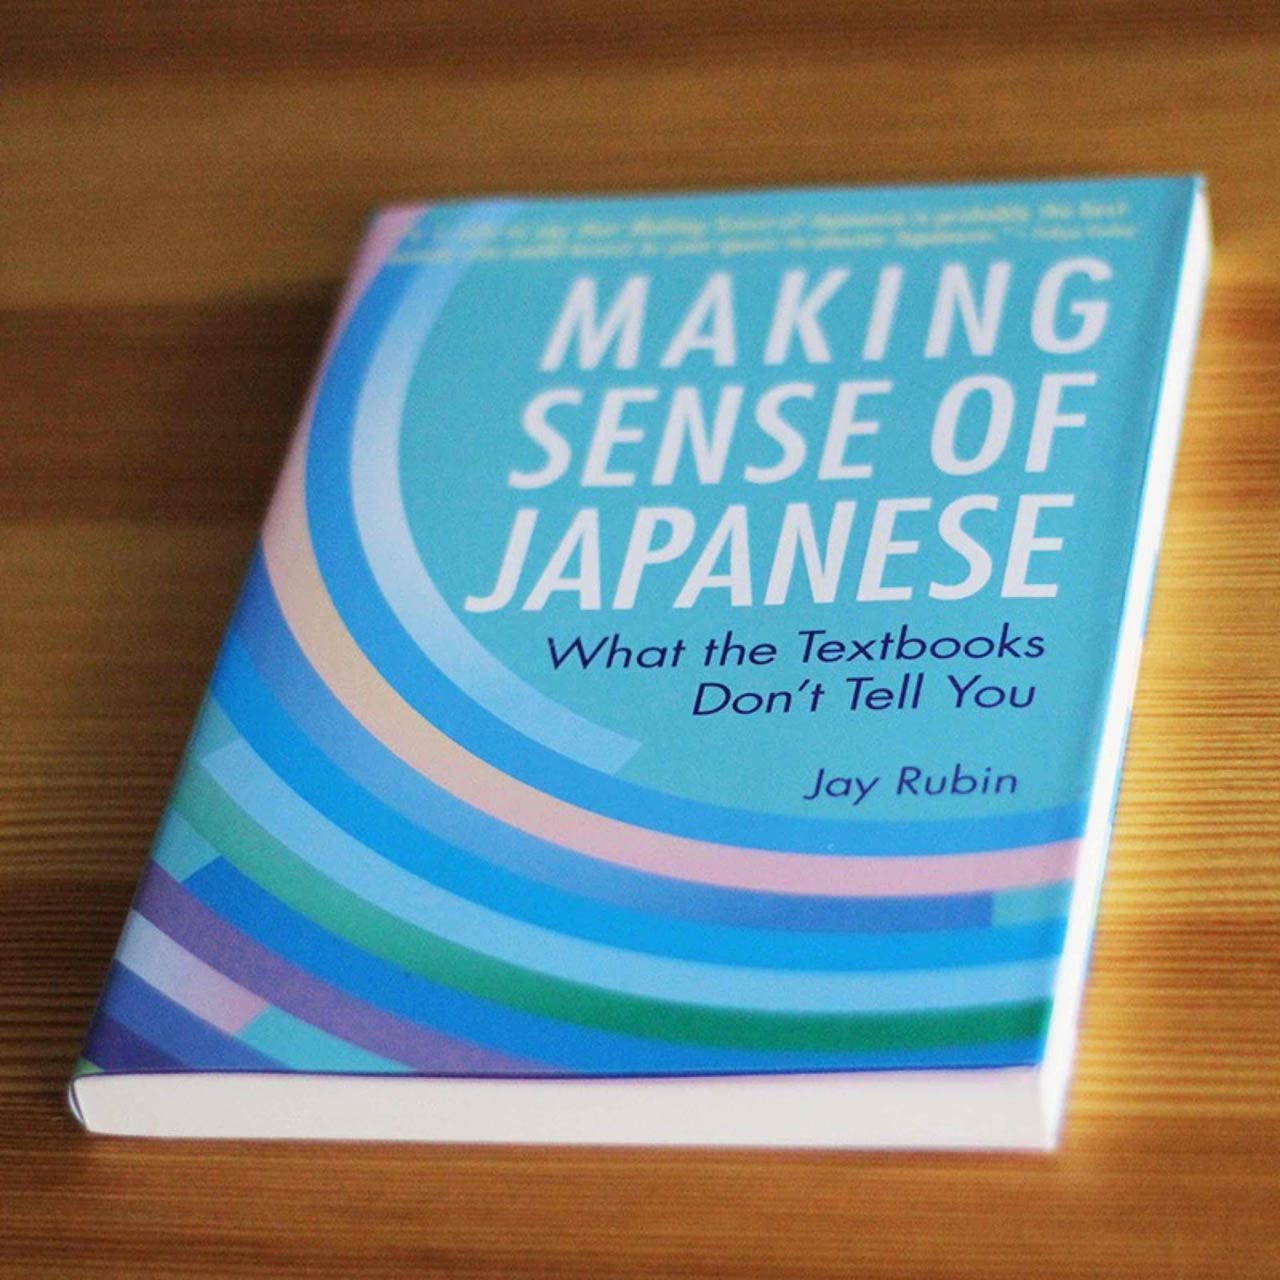 photo of the making sense of japanese book on a table